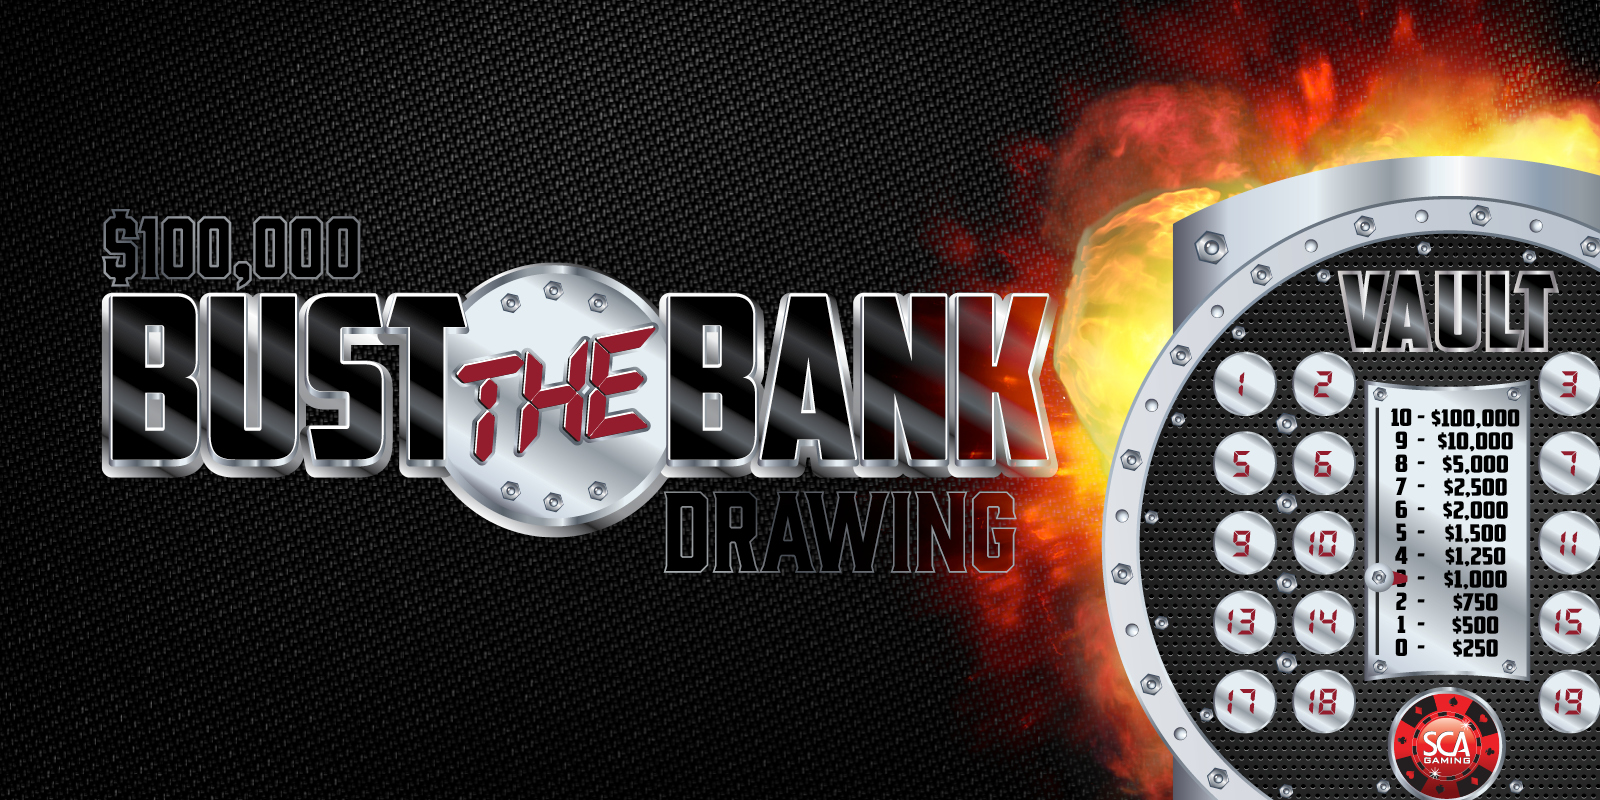 Bust The bank visual showing a vault with flames behind it and teh words to the left saying $100,000 BUST THE BANK DRAWING